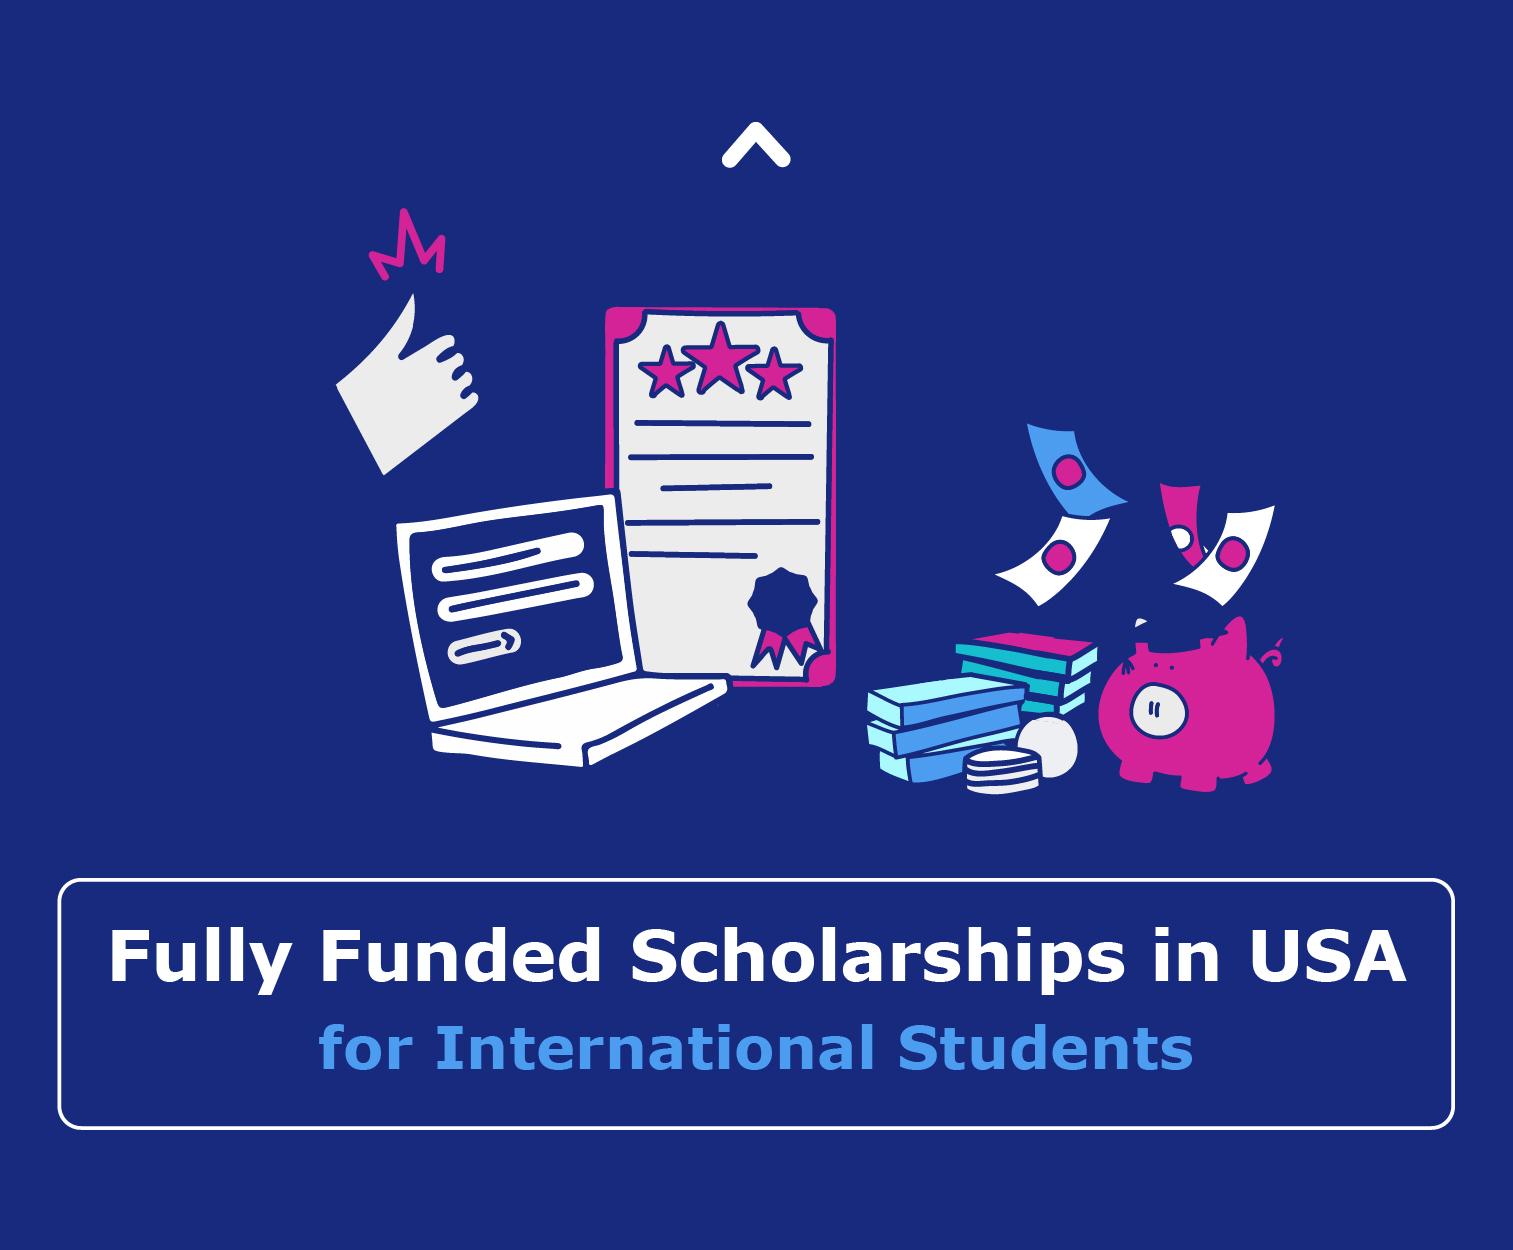 Fully Funded Scholarships in USA for International Students